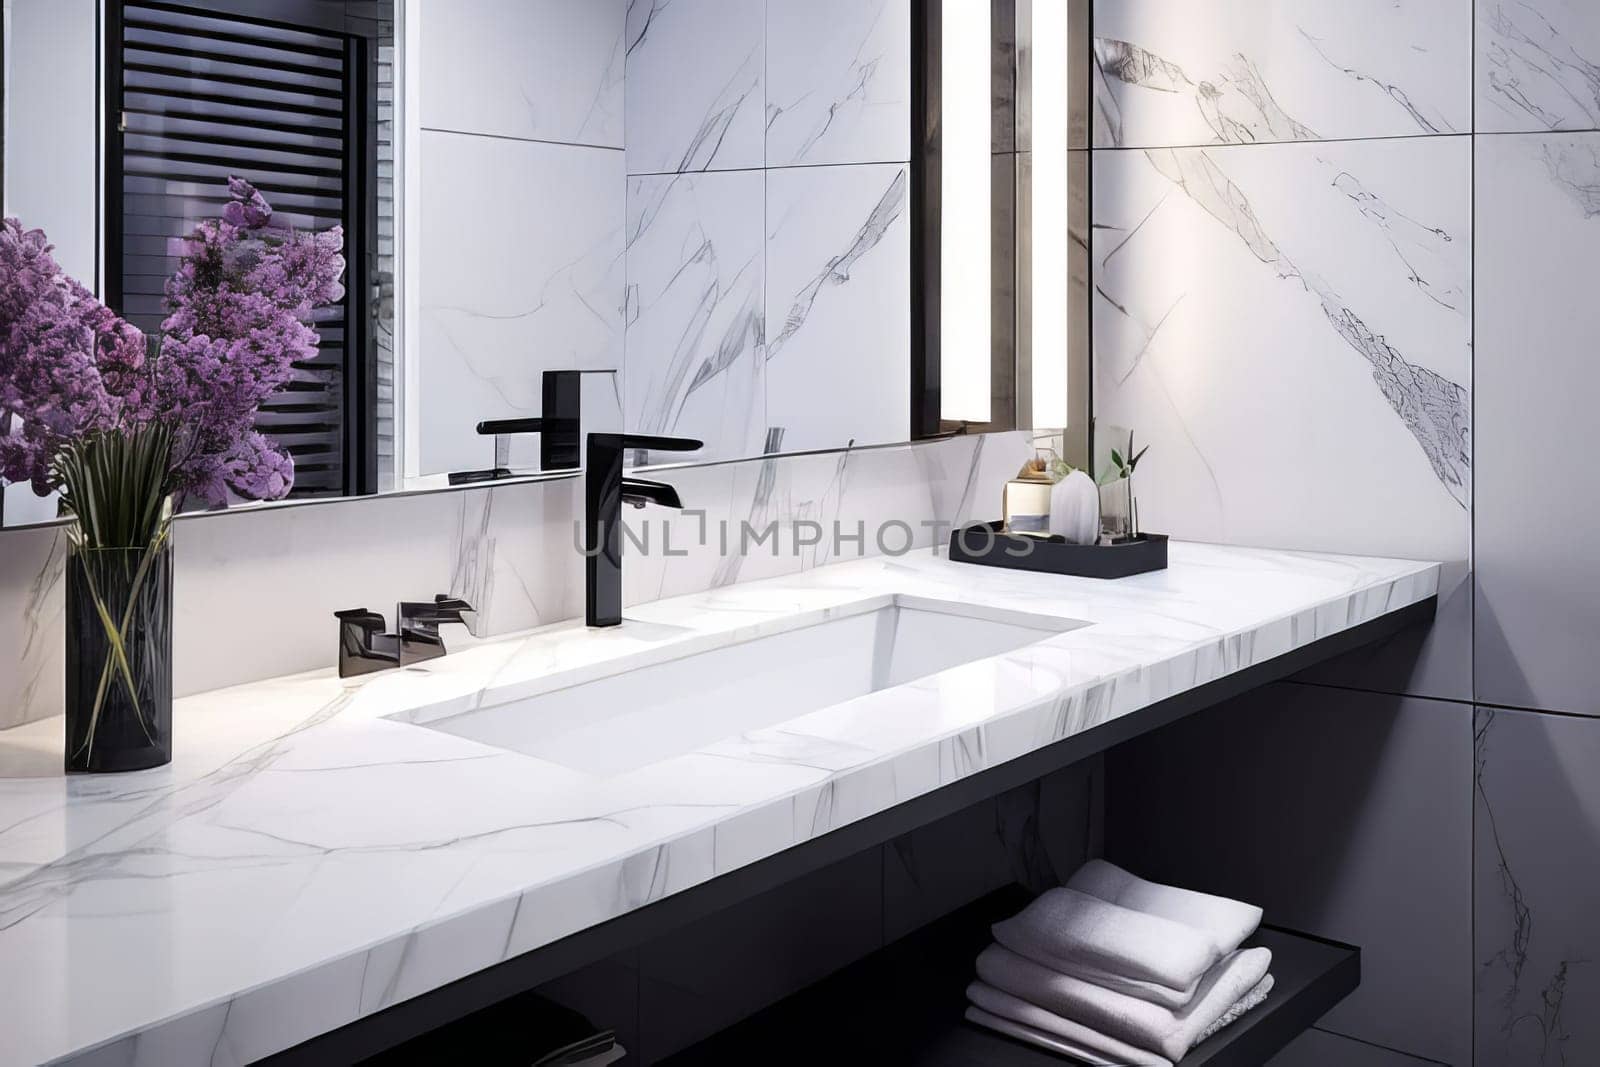 Exquisite modern bathroom design in soothing lilac hues. Elegance meets tranquility